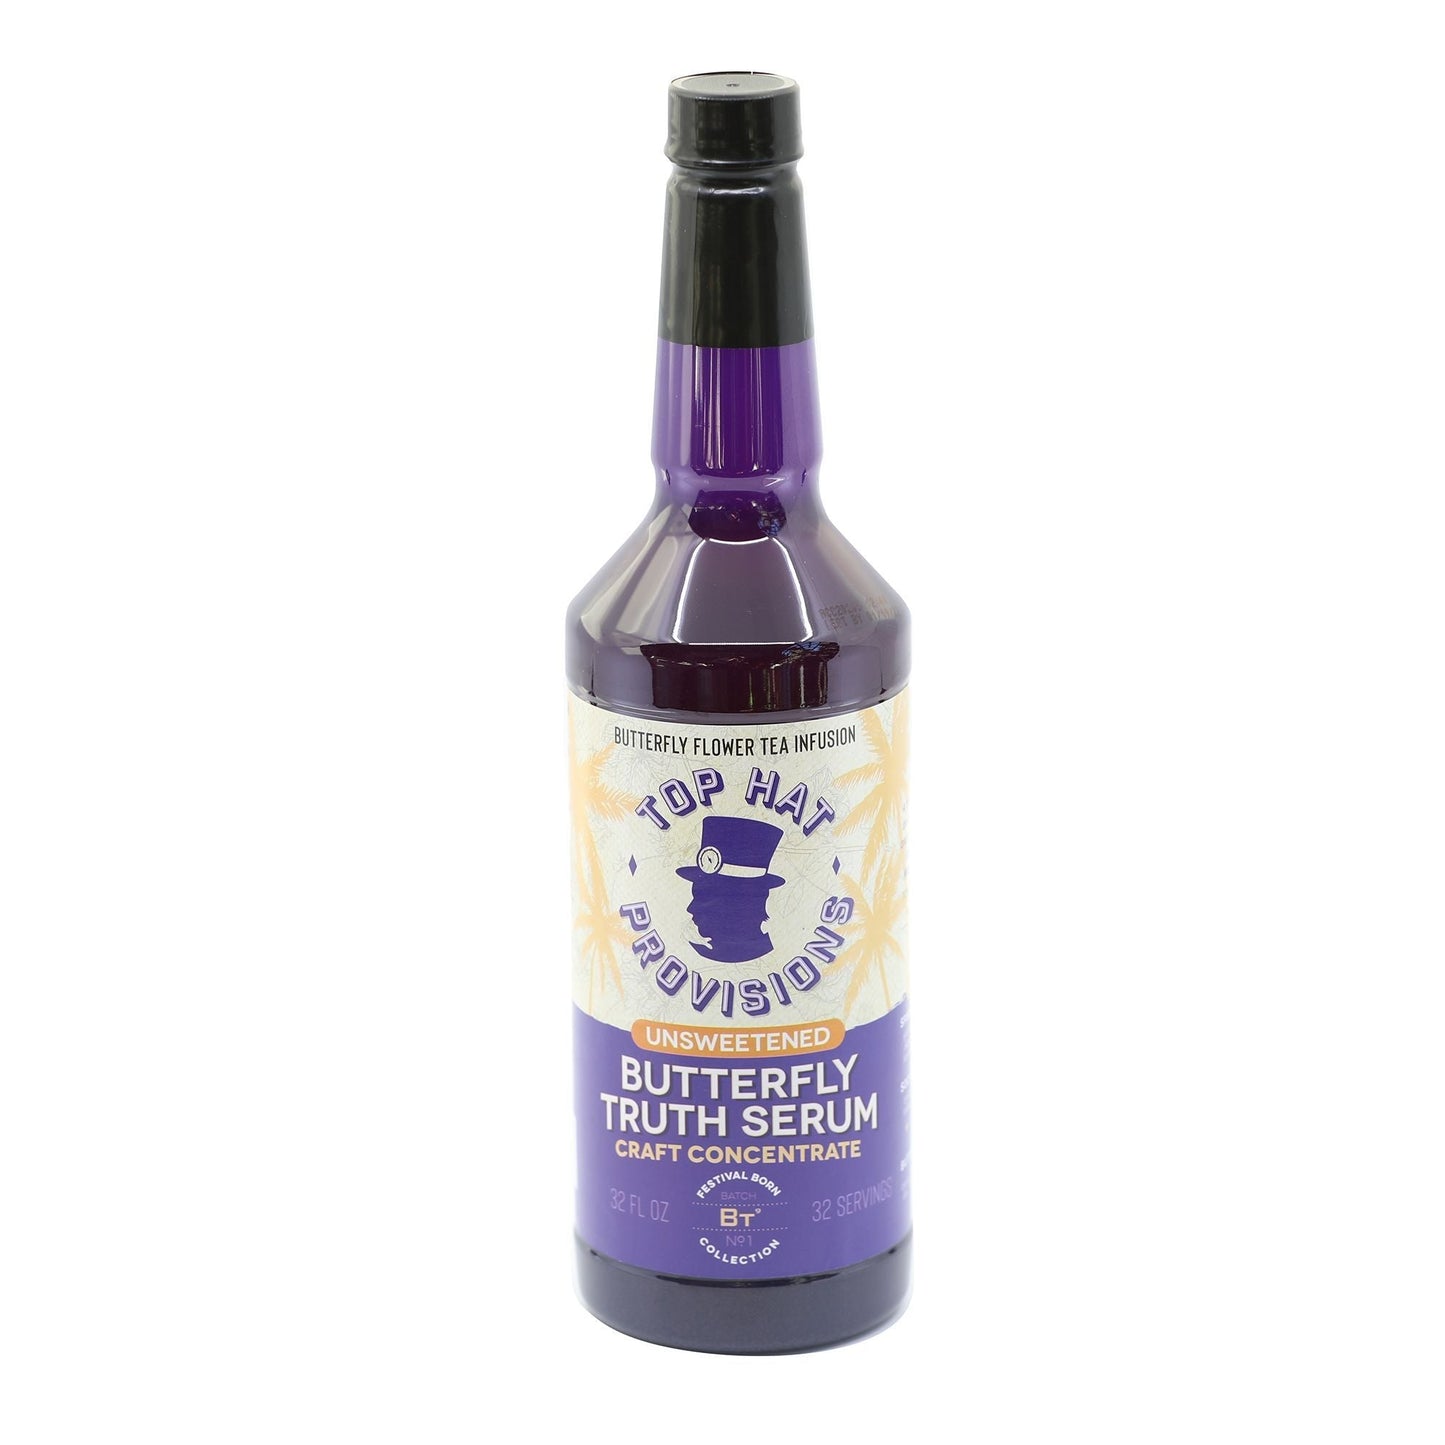 Top Hat Butterfly Truth Serum - Butterfly Pea Floral Extract - Blue Flower Tea Tincture - Alcohol Free Butterfly Pea Bitters - Unsweetened - Non-Alcoholic - Make Drinks Natural Blue and Indigo Purple - Single 32oz Bottle - Groove Rabbit